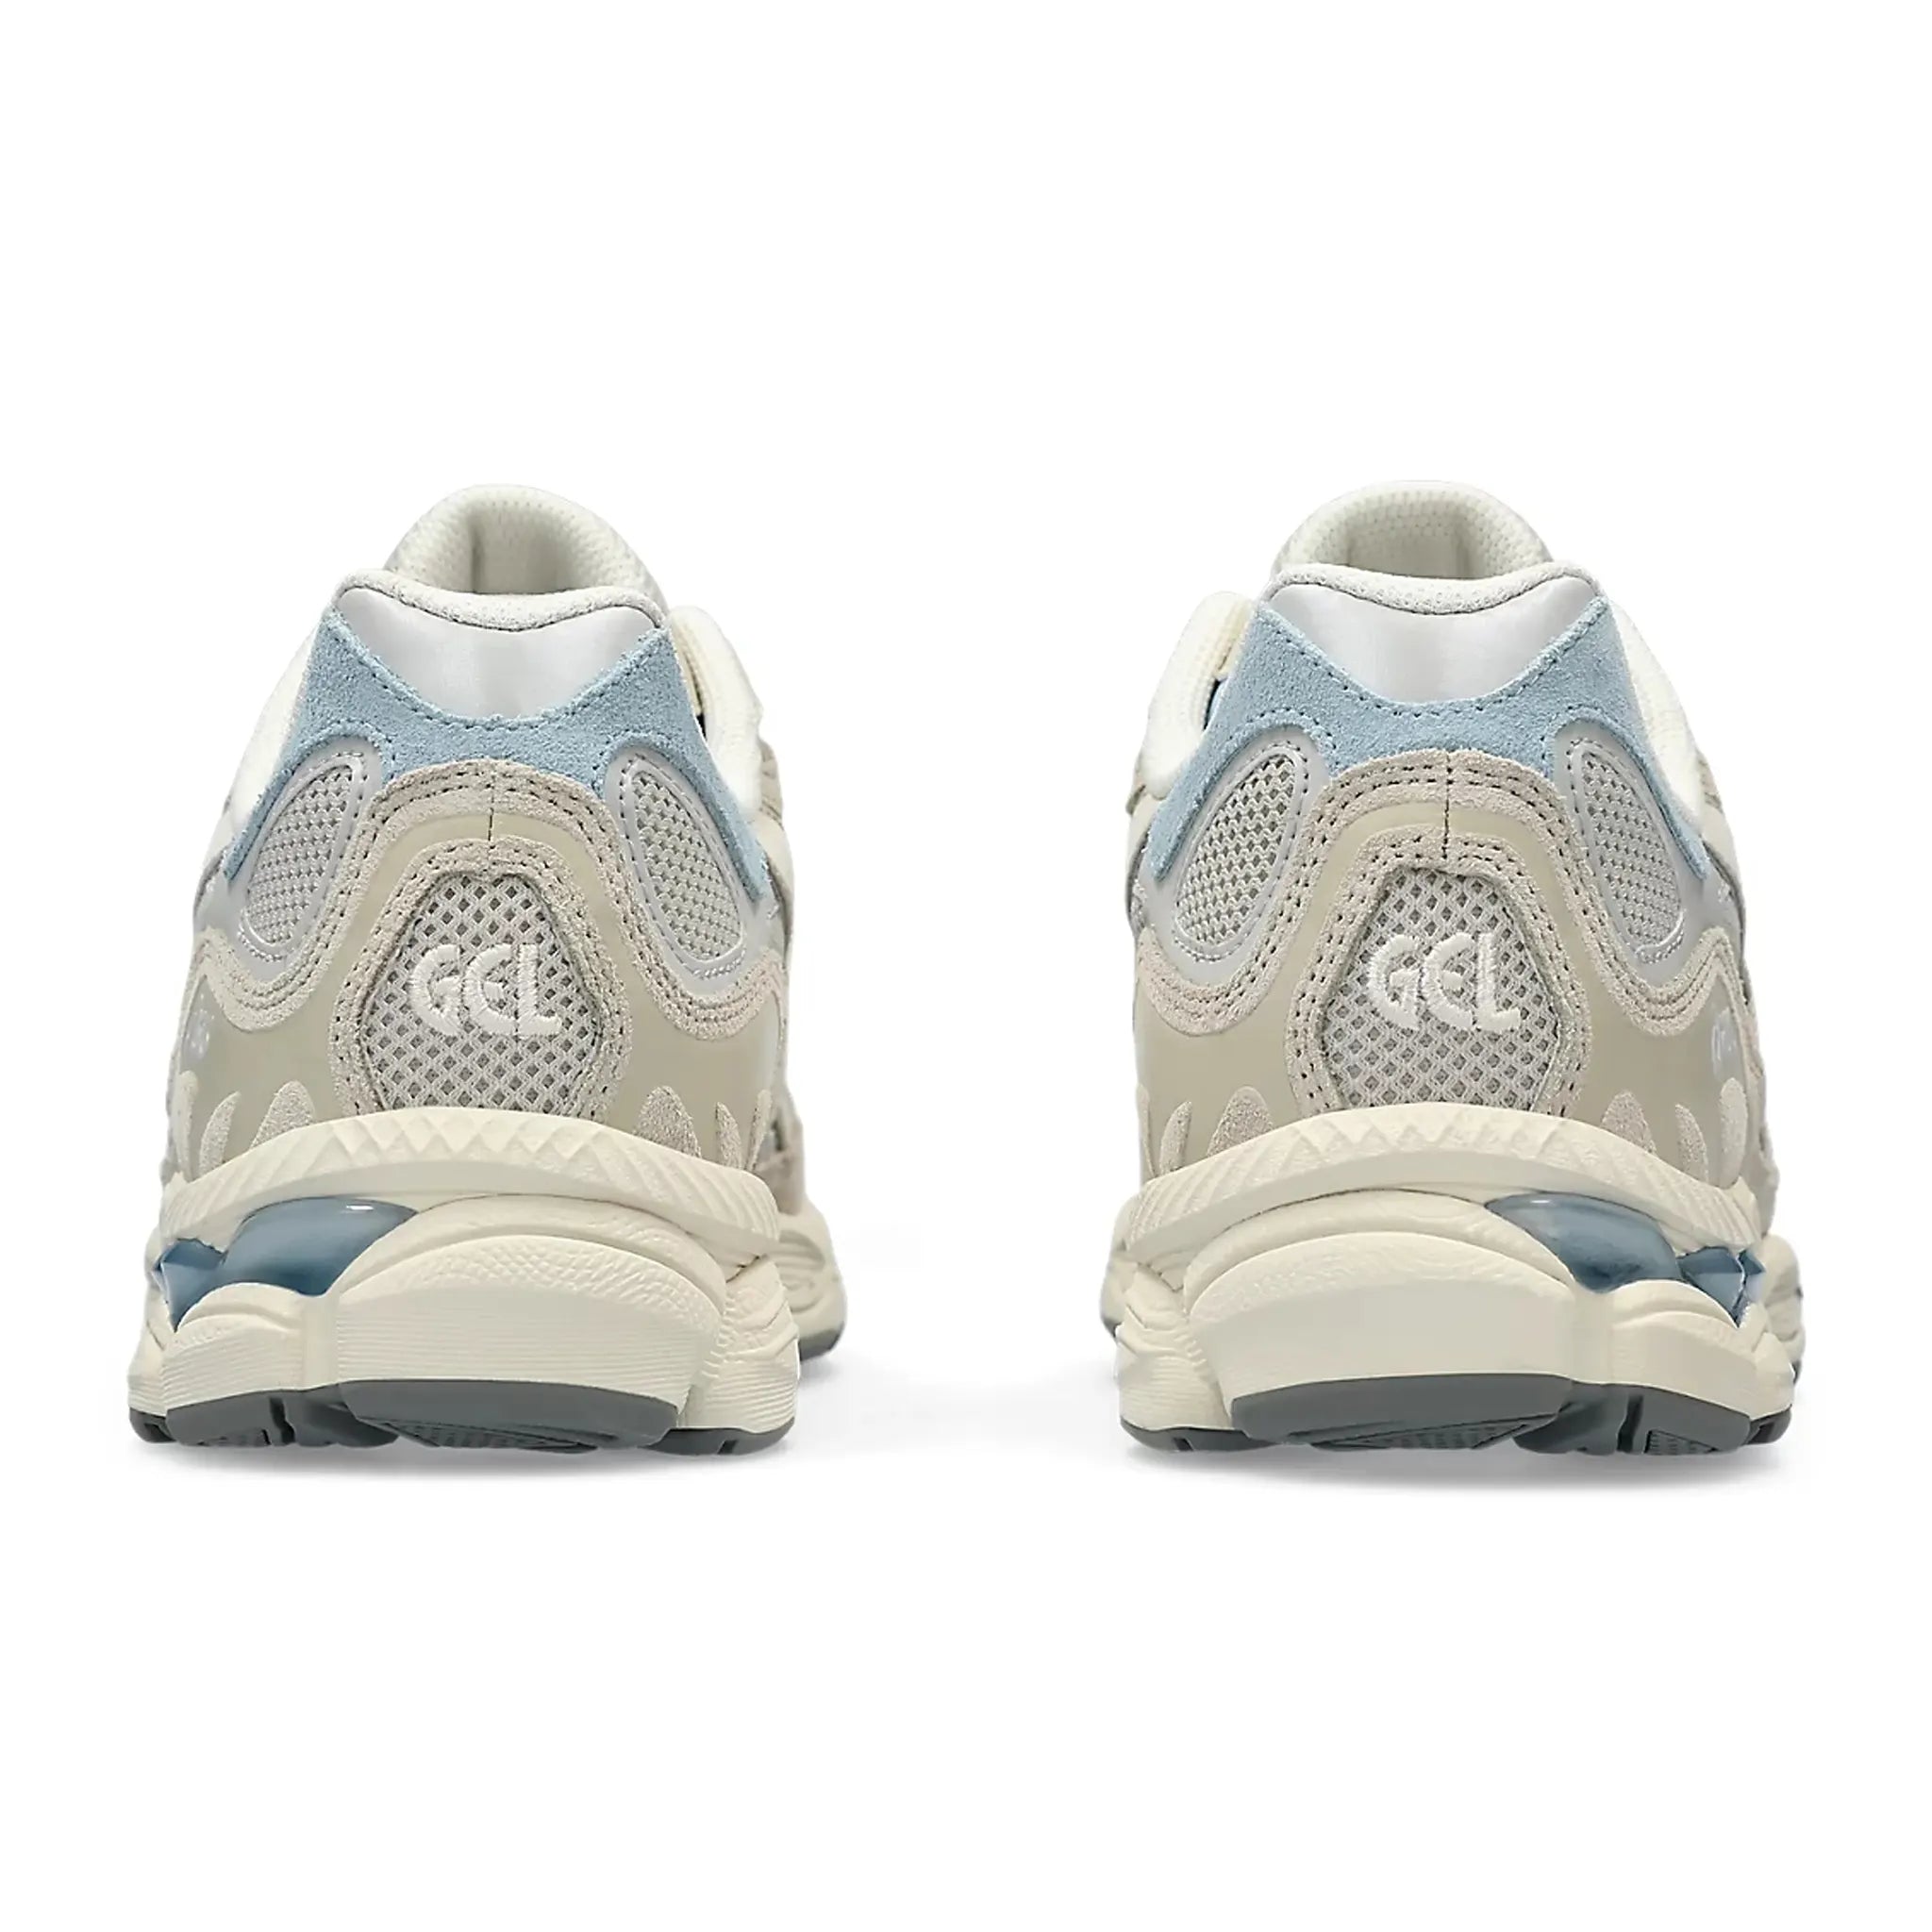 Back view of Asics Gel-NYC Grey Blue (W) 1203A383-023